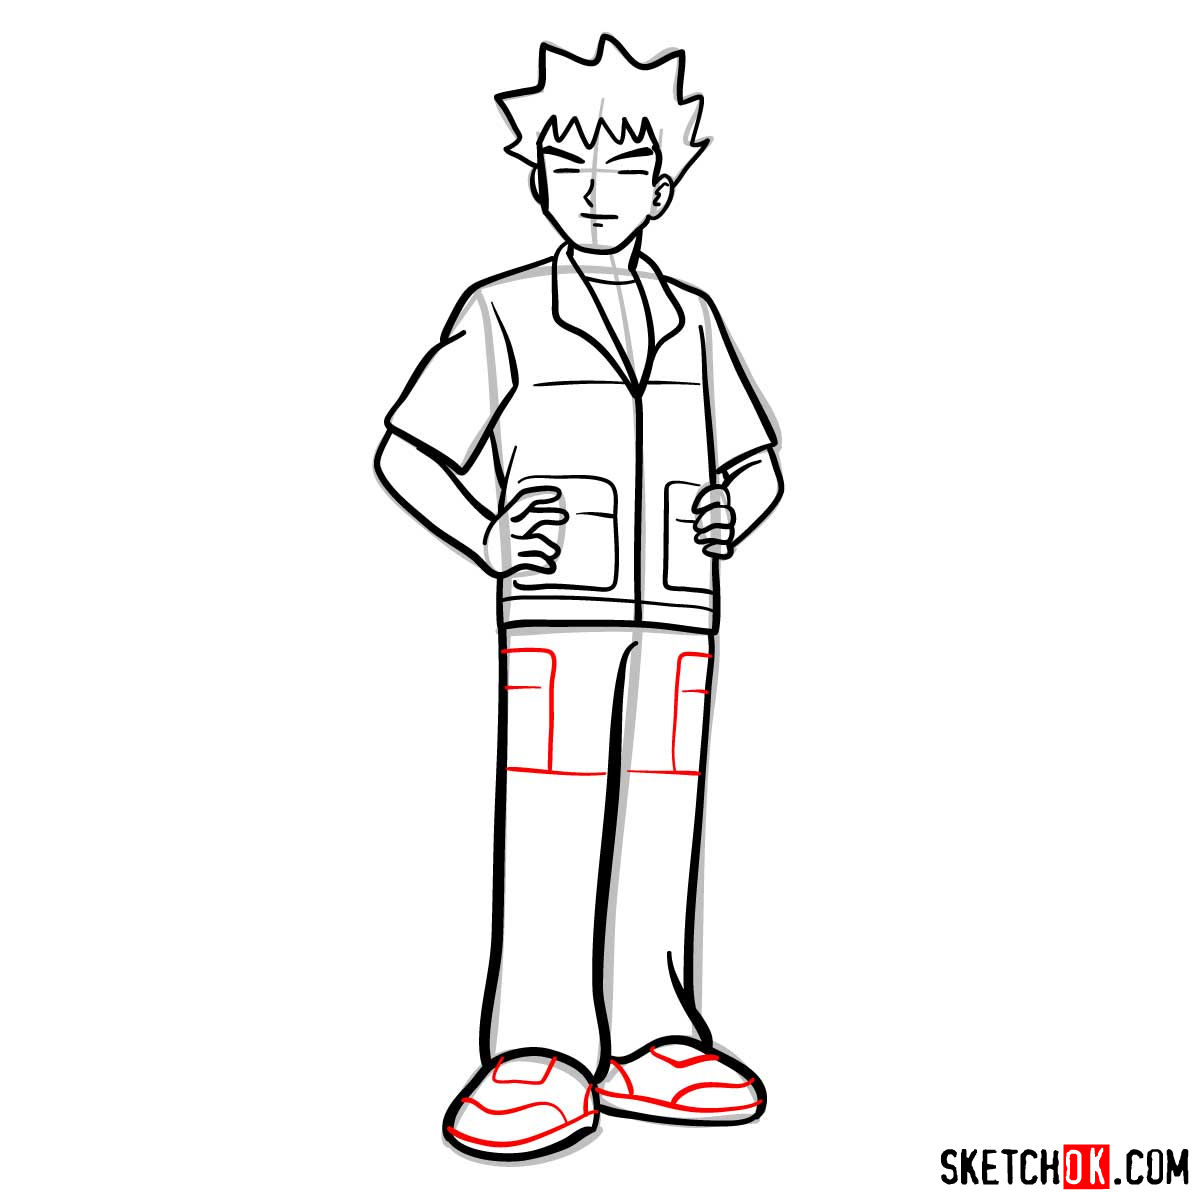 How to draw Brock from Pokemon anime - step 14